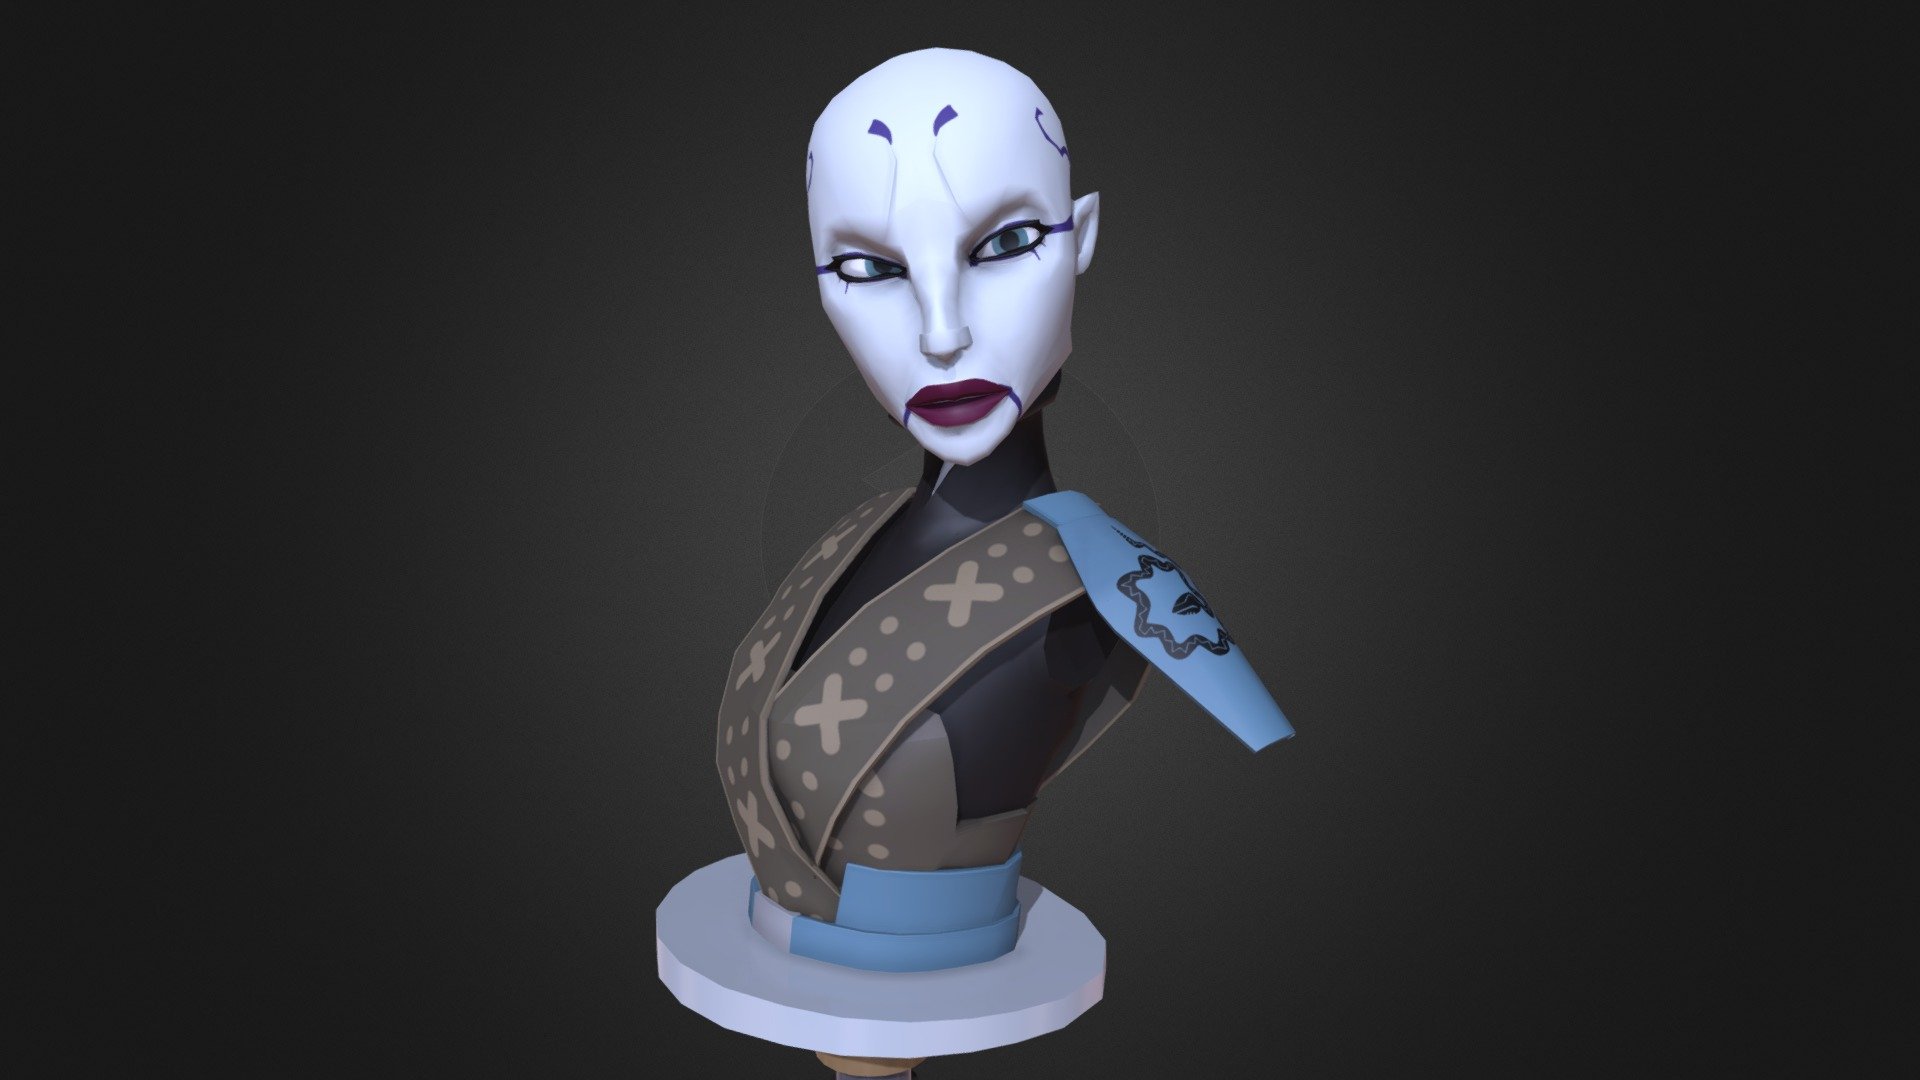 One of my favorite villain in the Star Wars' Universe.

For the Sketchfab Low Poly Challenge: Stylized Bust 3d model